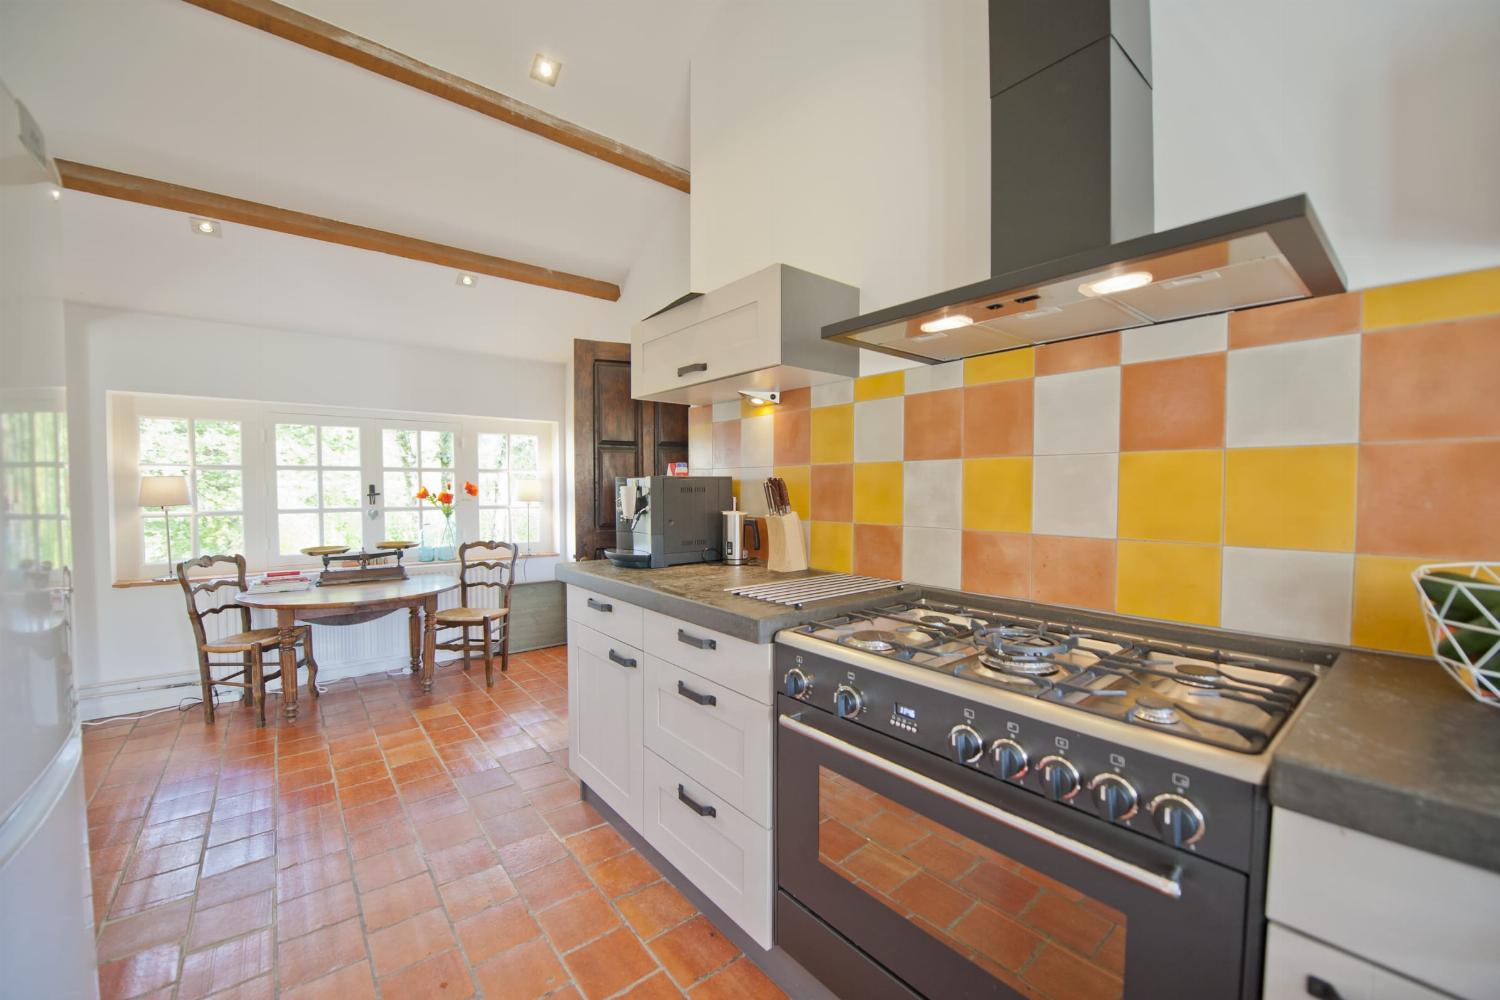 Kitchen | Rental accommodation in Nouvelle-Aquitaine